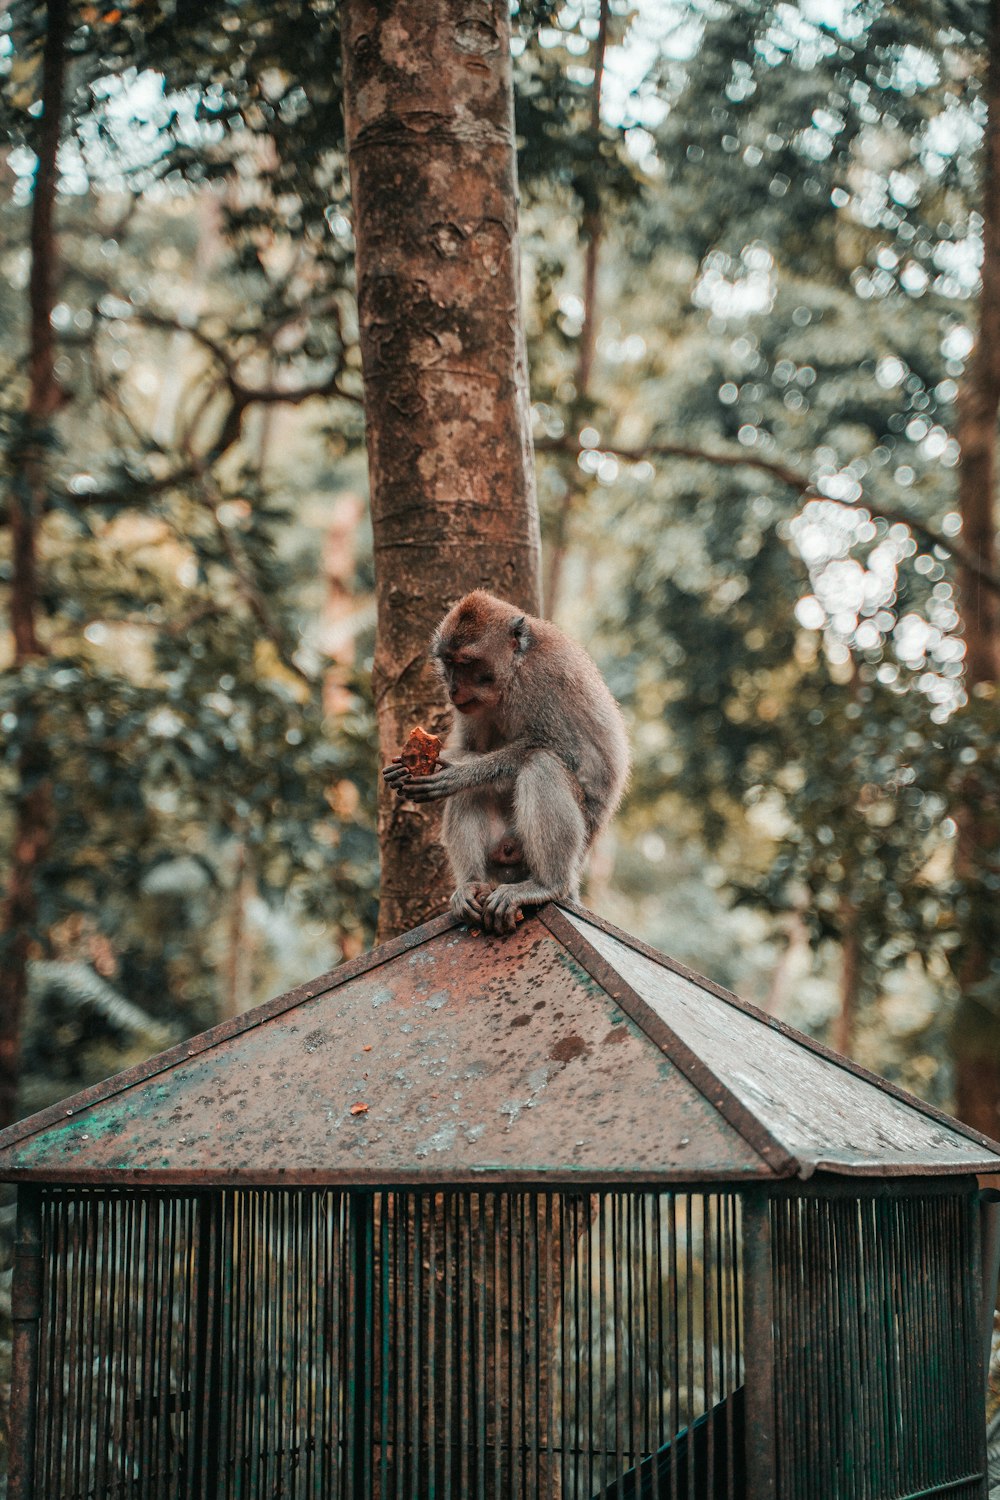 brown and gray monkey sitting on top of cage